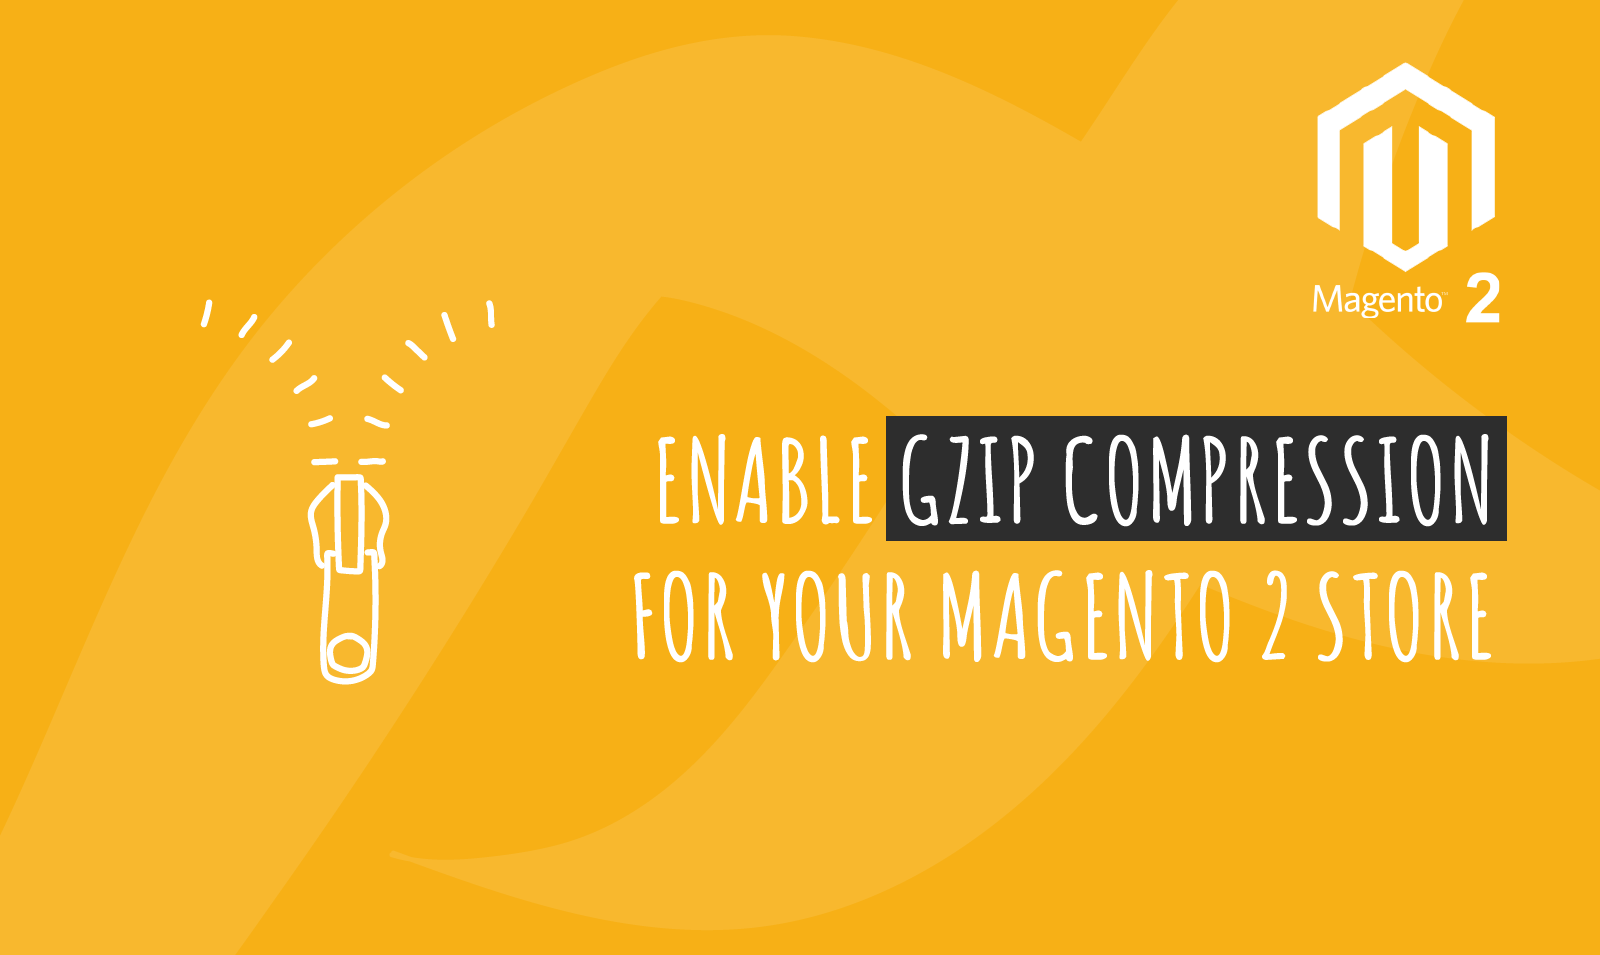 ENABLE GZIP COMPRESSION FOR YOUR MAGENTO 2 STORE